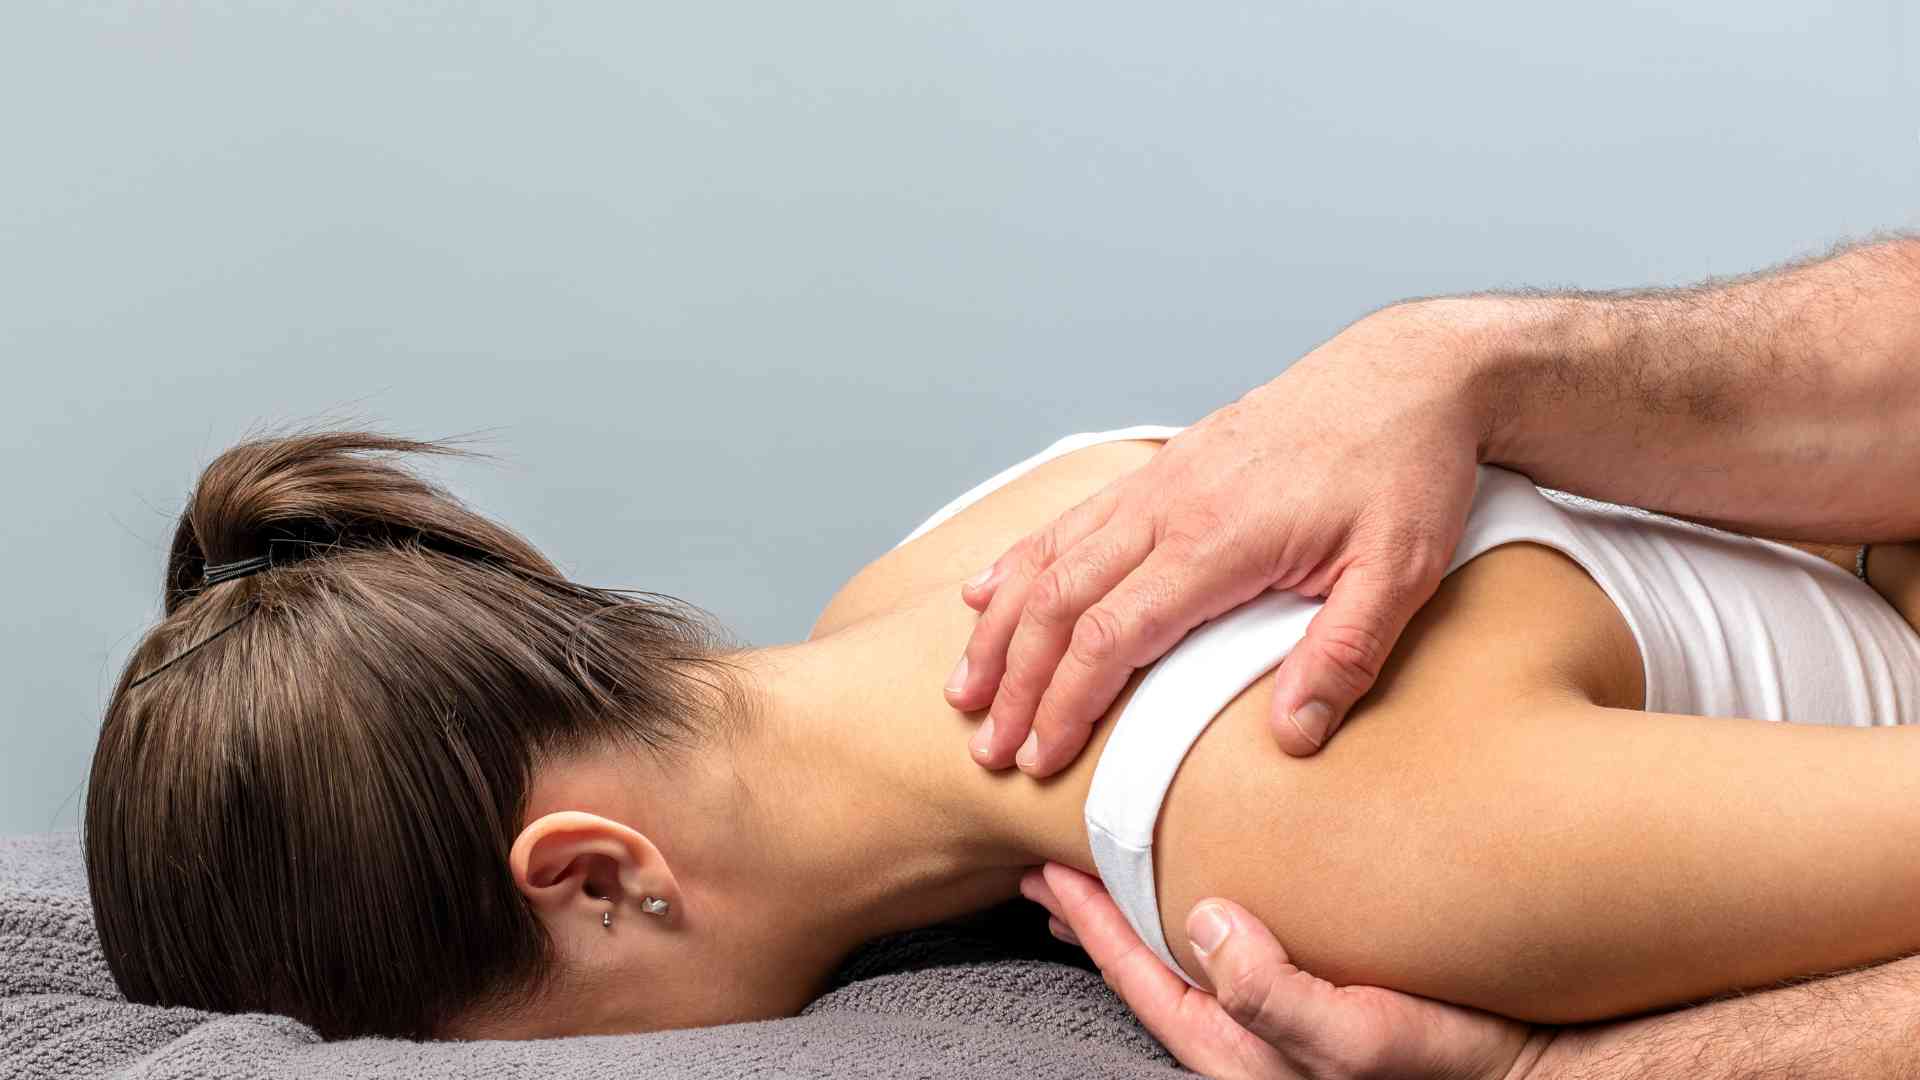 Selektive oder funktionelle Physiotherapie?